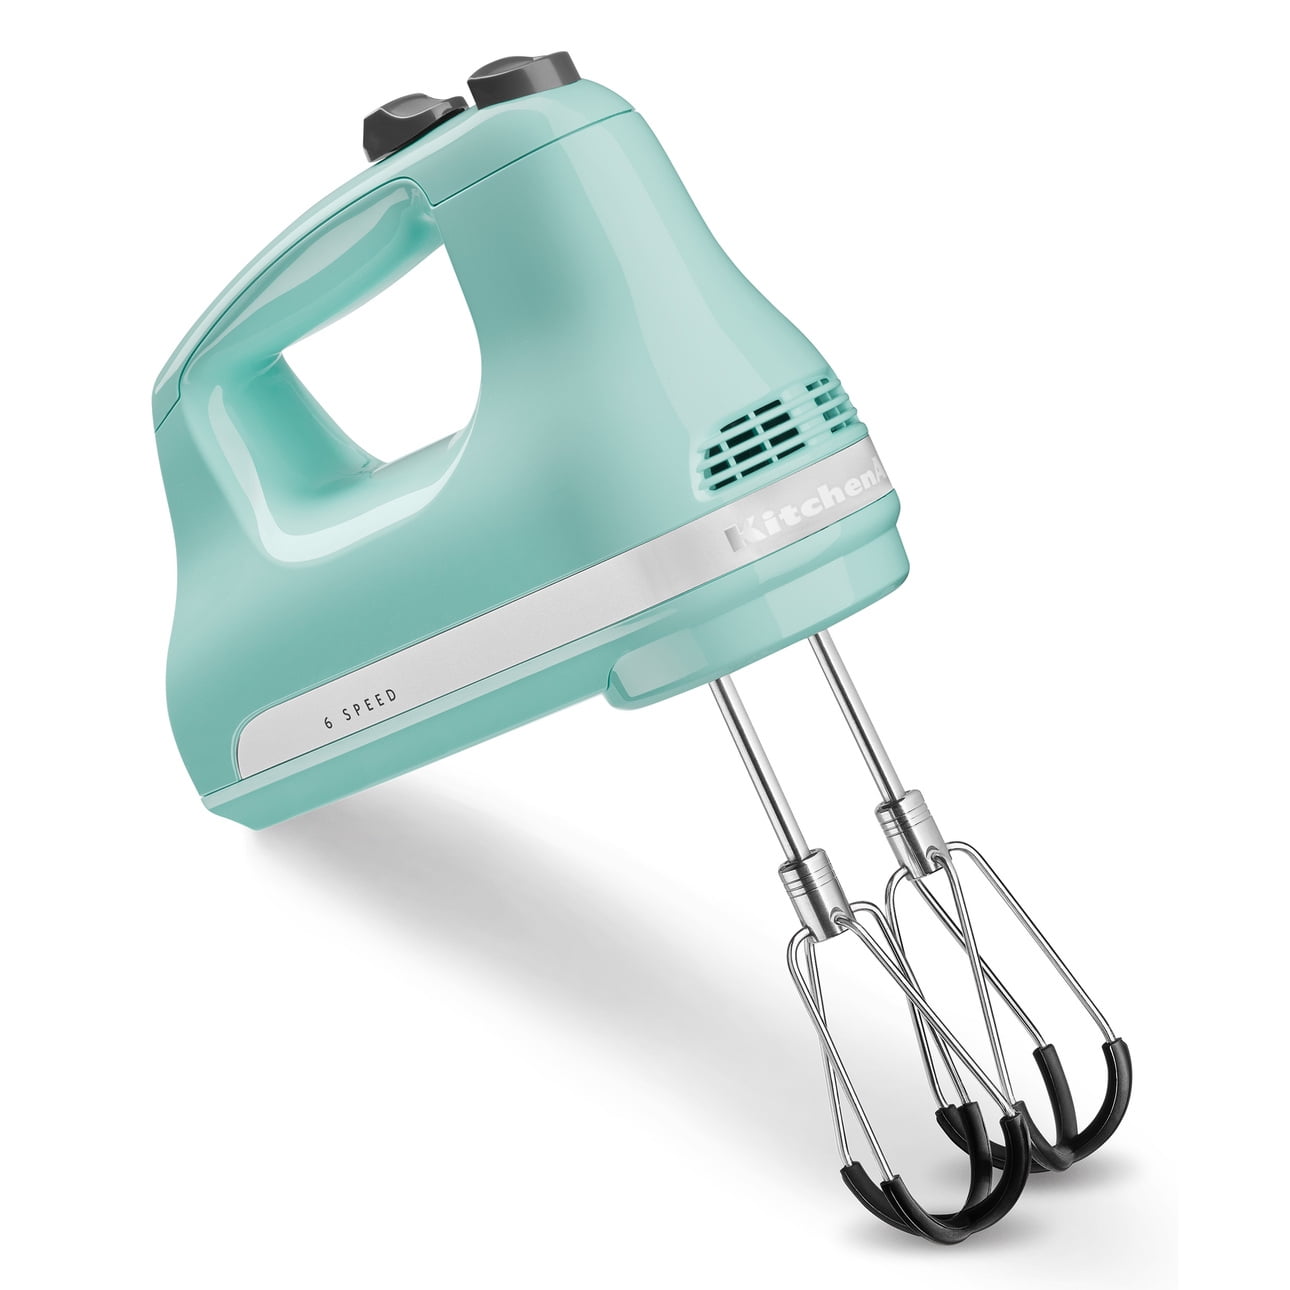 KitchenAid 5-Speed Ultra Power Hand Mixer with powerful one touch speed control and multiple attachments khm53ga Green Apple. quiet DC motor 